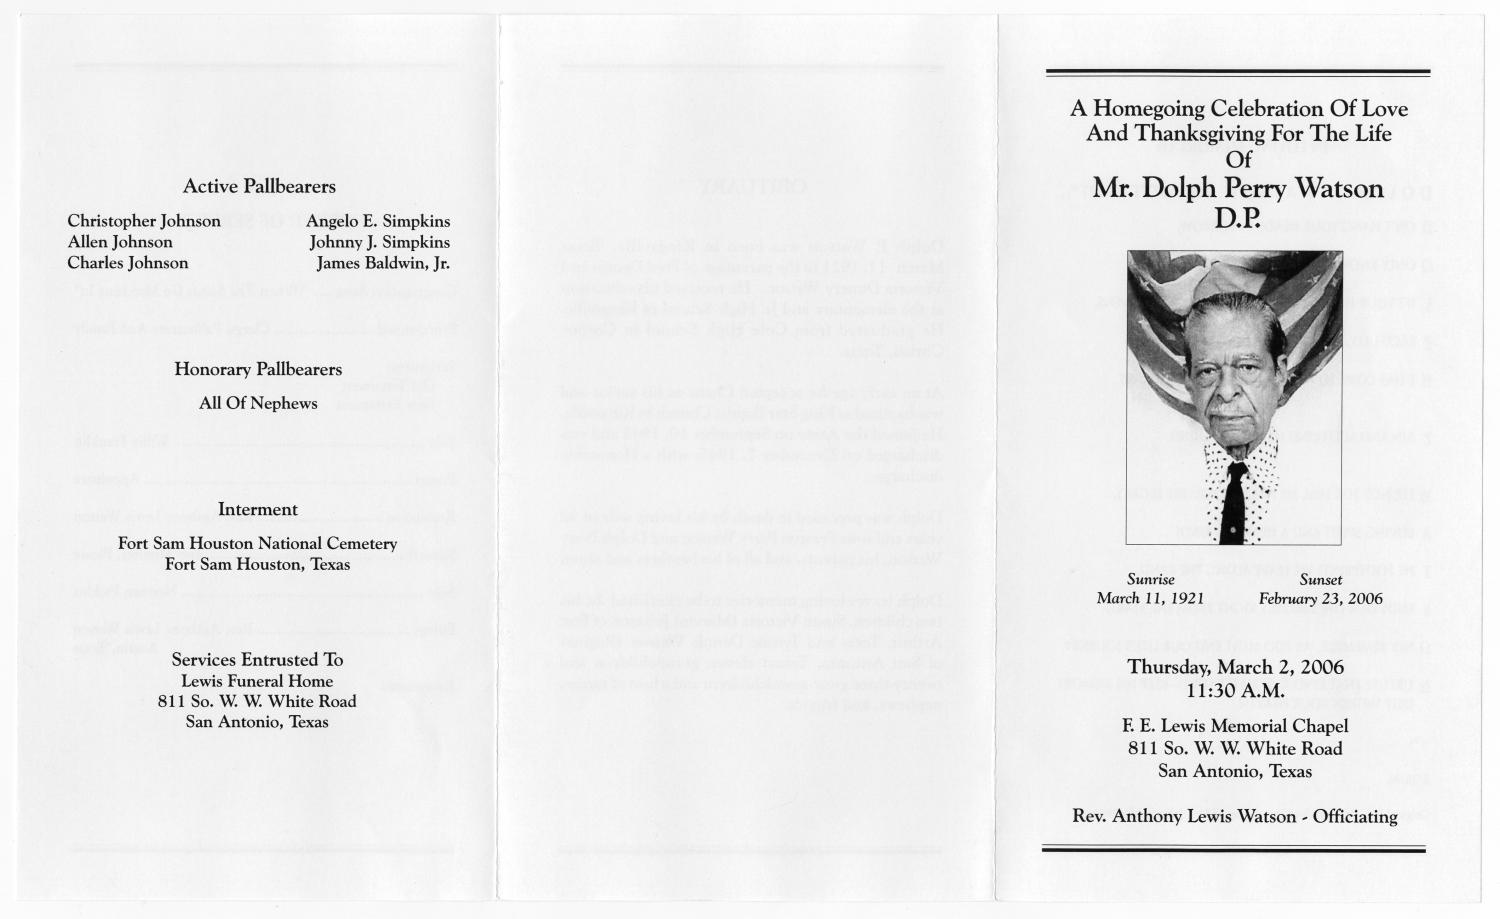 [Funeral Program for Dolph Perry Watson, March 2, 2006]
                                                
                                                    [Sequence #]: 3 of 3
                                                